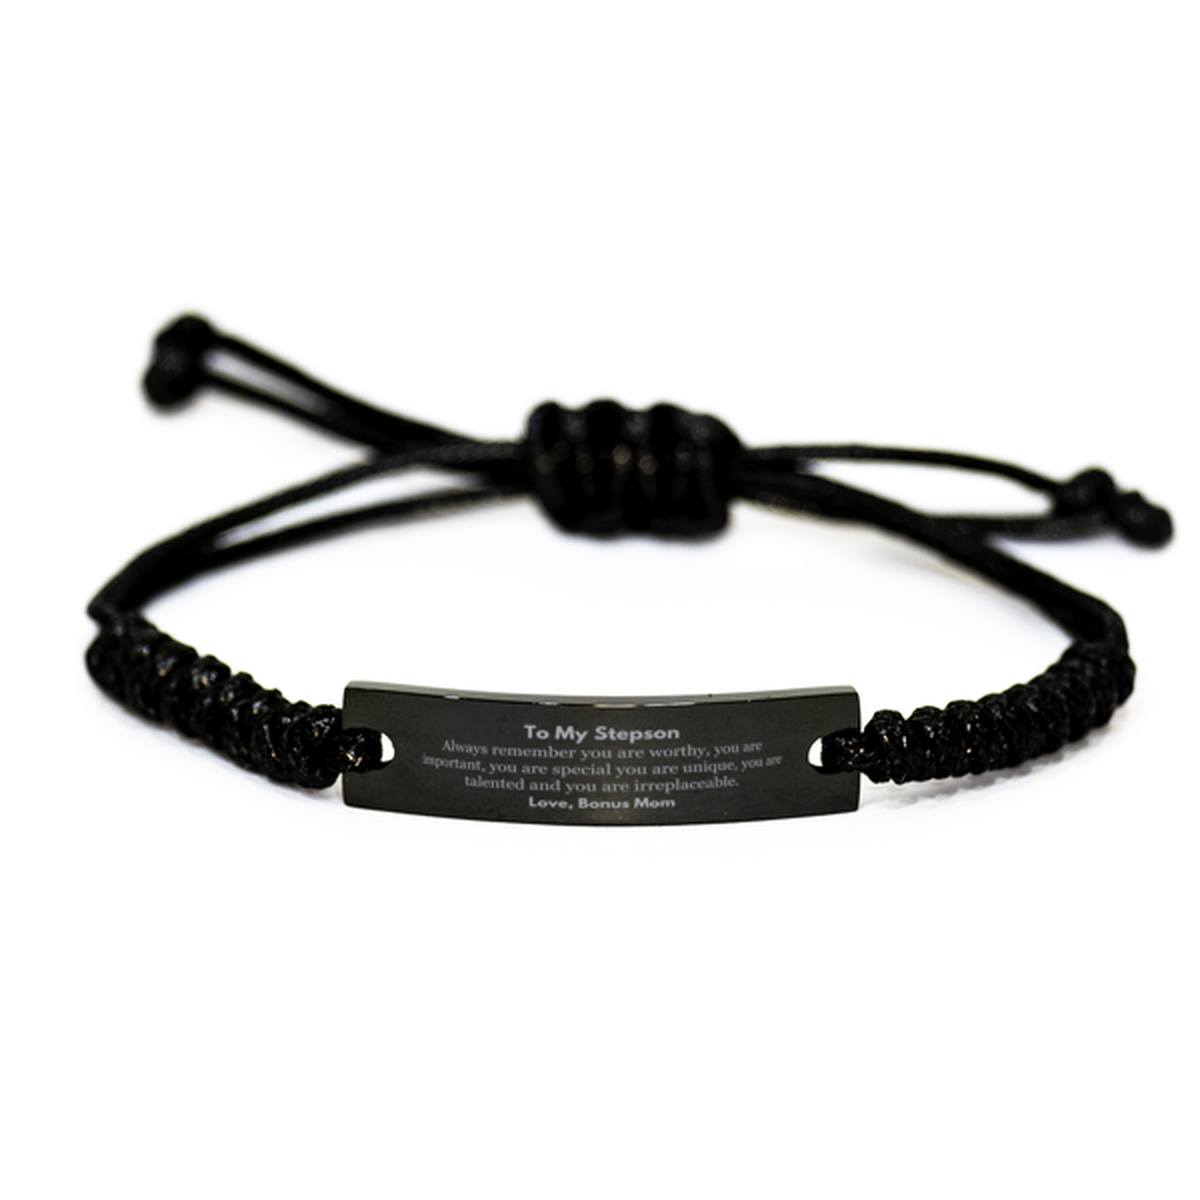 Stepson Birthday Gifts from Bonus Mom, Inspirational Black Rope Bracelet for Stepson Christmas Graduation Gifts for Stepson Always remember you are worthy, you are important. Love, Bonus Mom